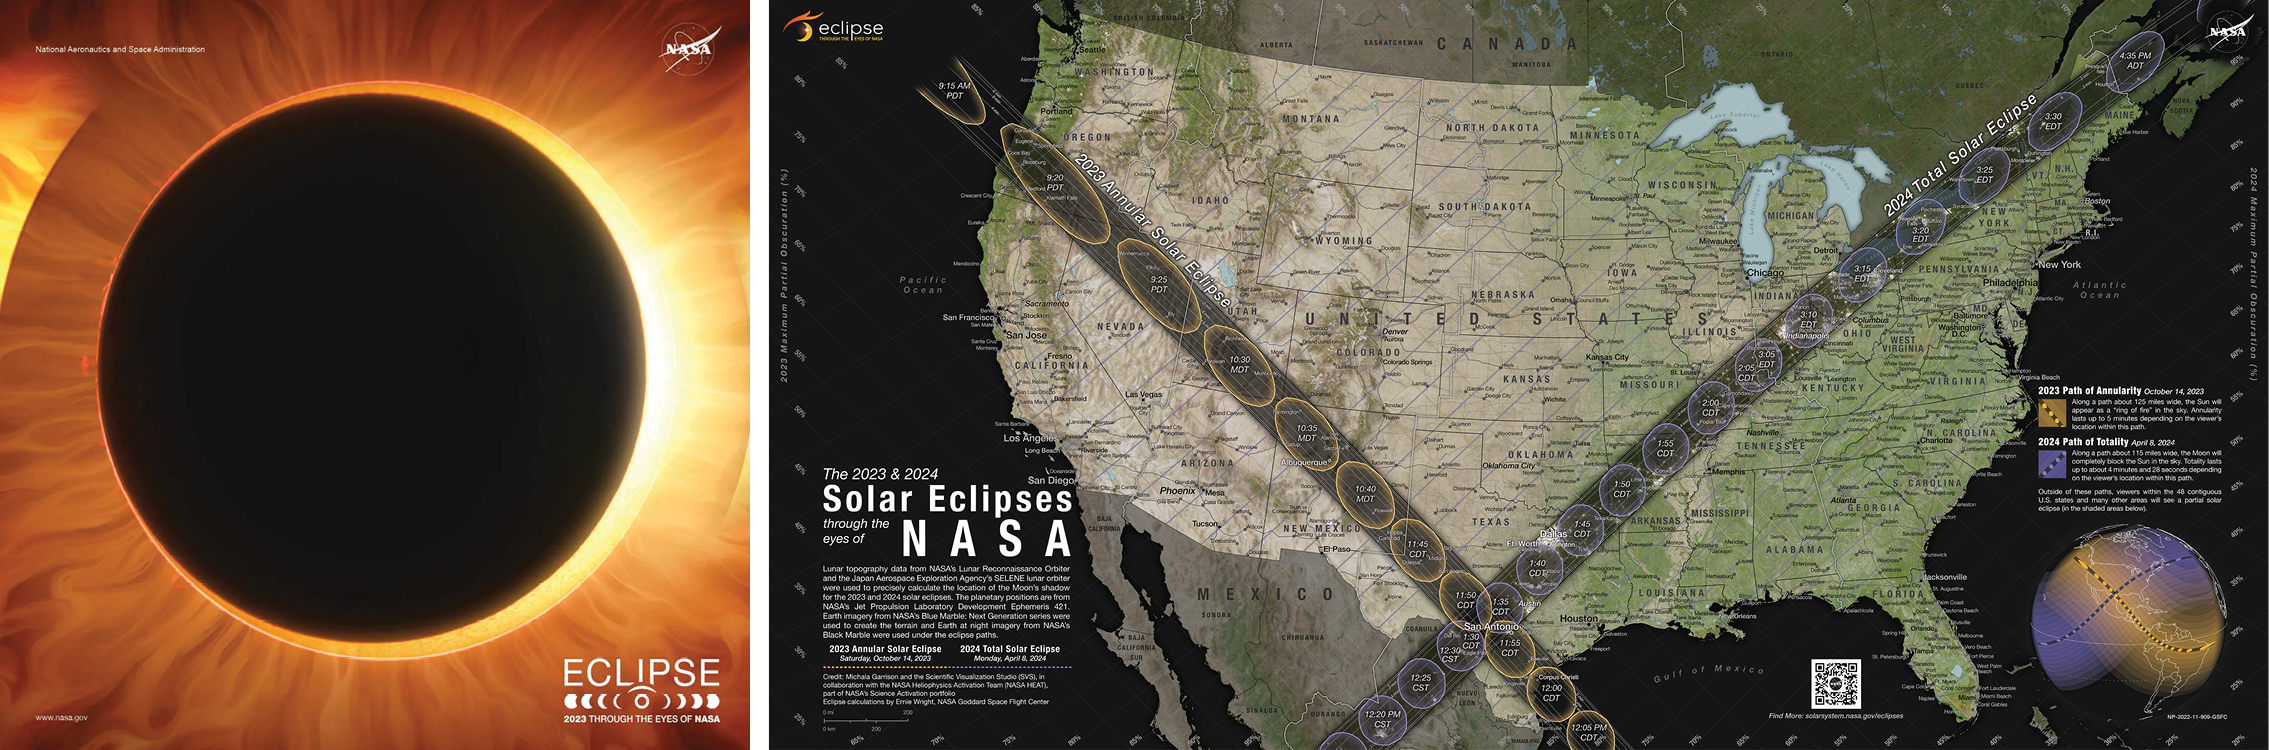 Images of NASA eclipse posters (left: annular solar eclipse, right: annular and total solar eclipse path map)